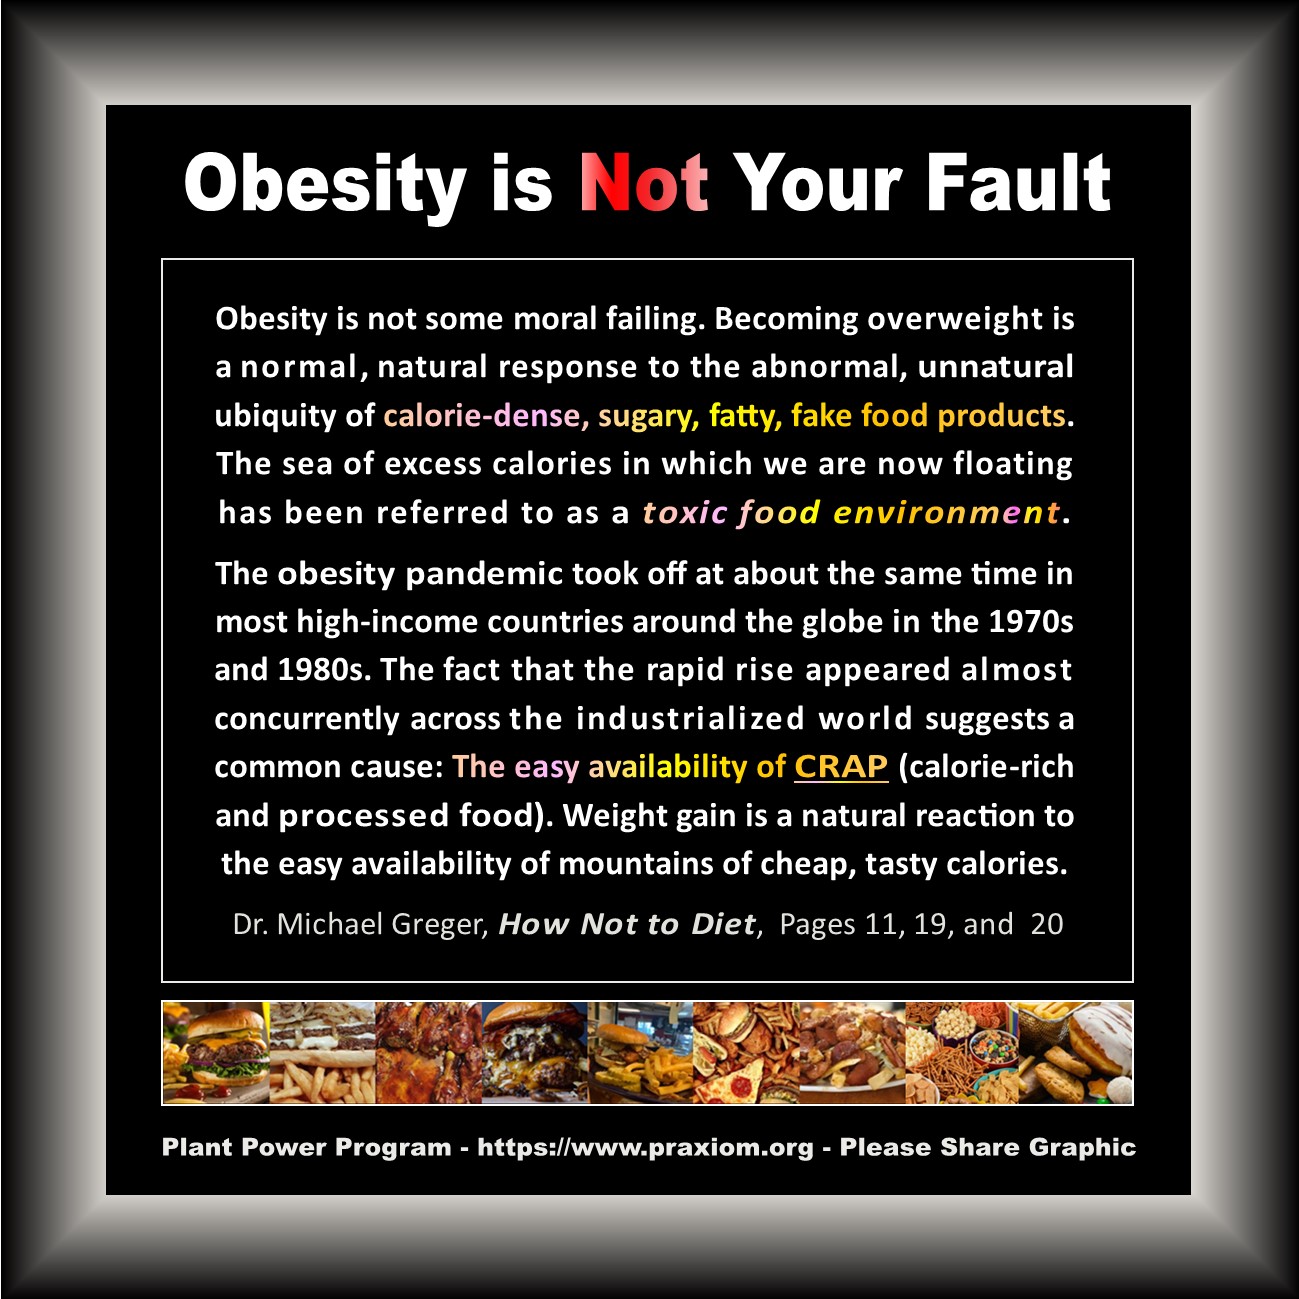 Obesity is Not Your Fault - Dr. Michael Greger